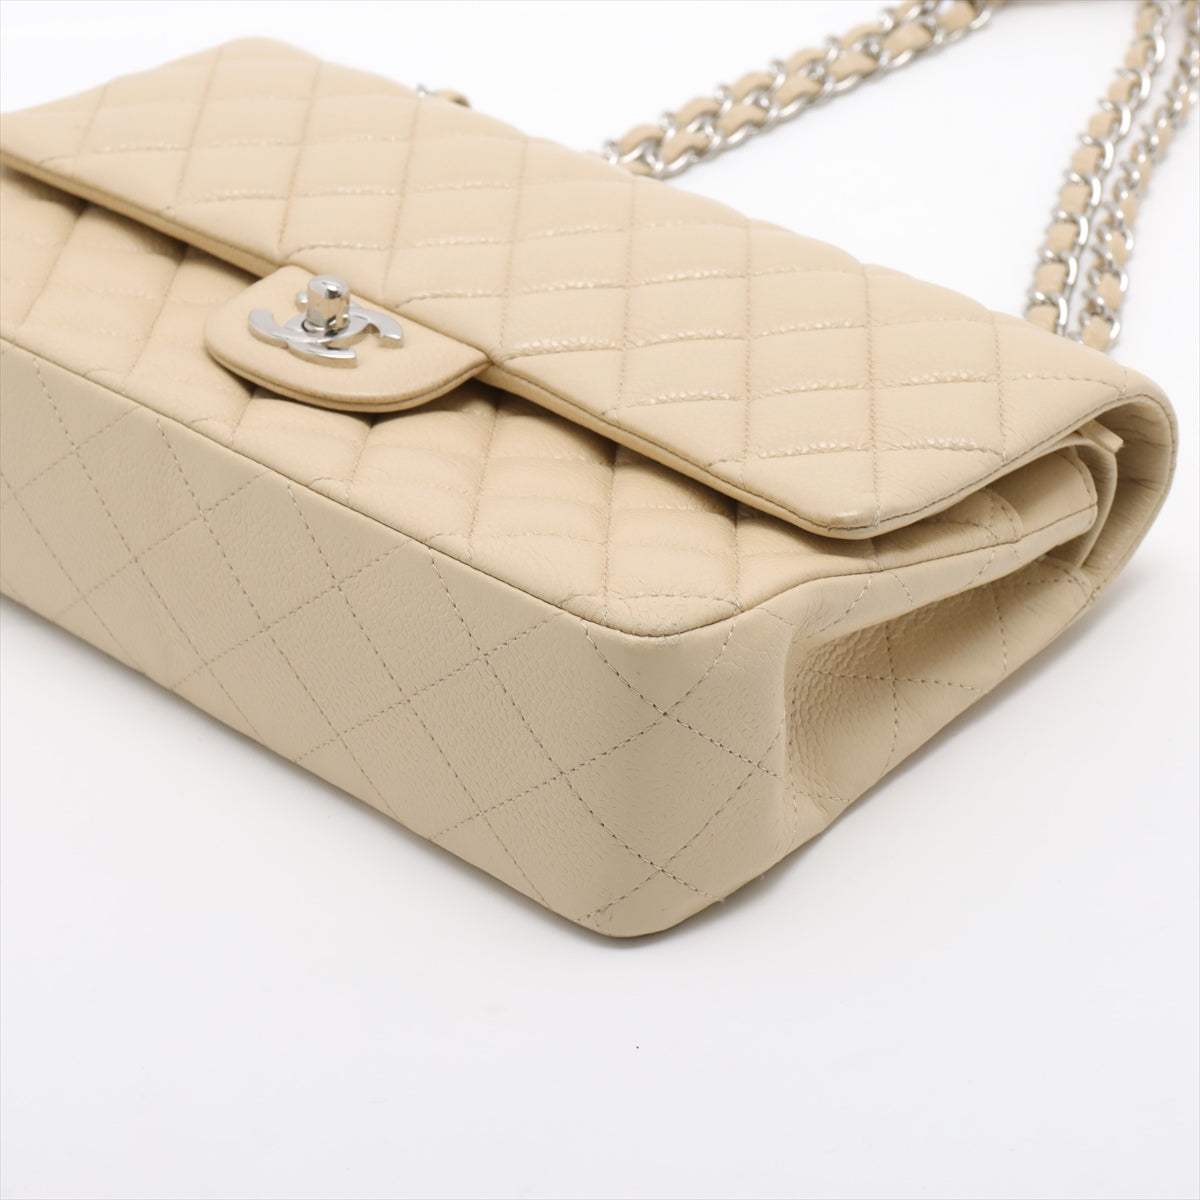 [Individual packaging] Chanel Matelasse Caviarskin Double flap Double chain bag Beige Silver Metal fittings 15849799   Leather repainted The inside edge is slightly solid